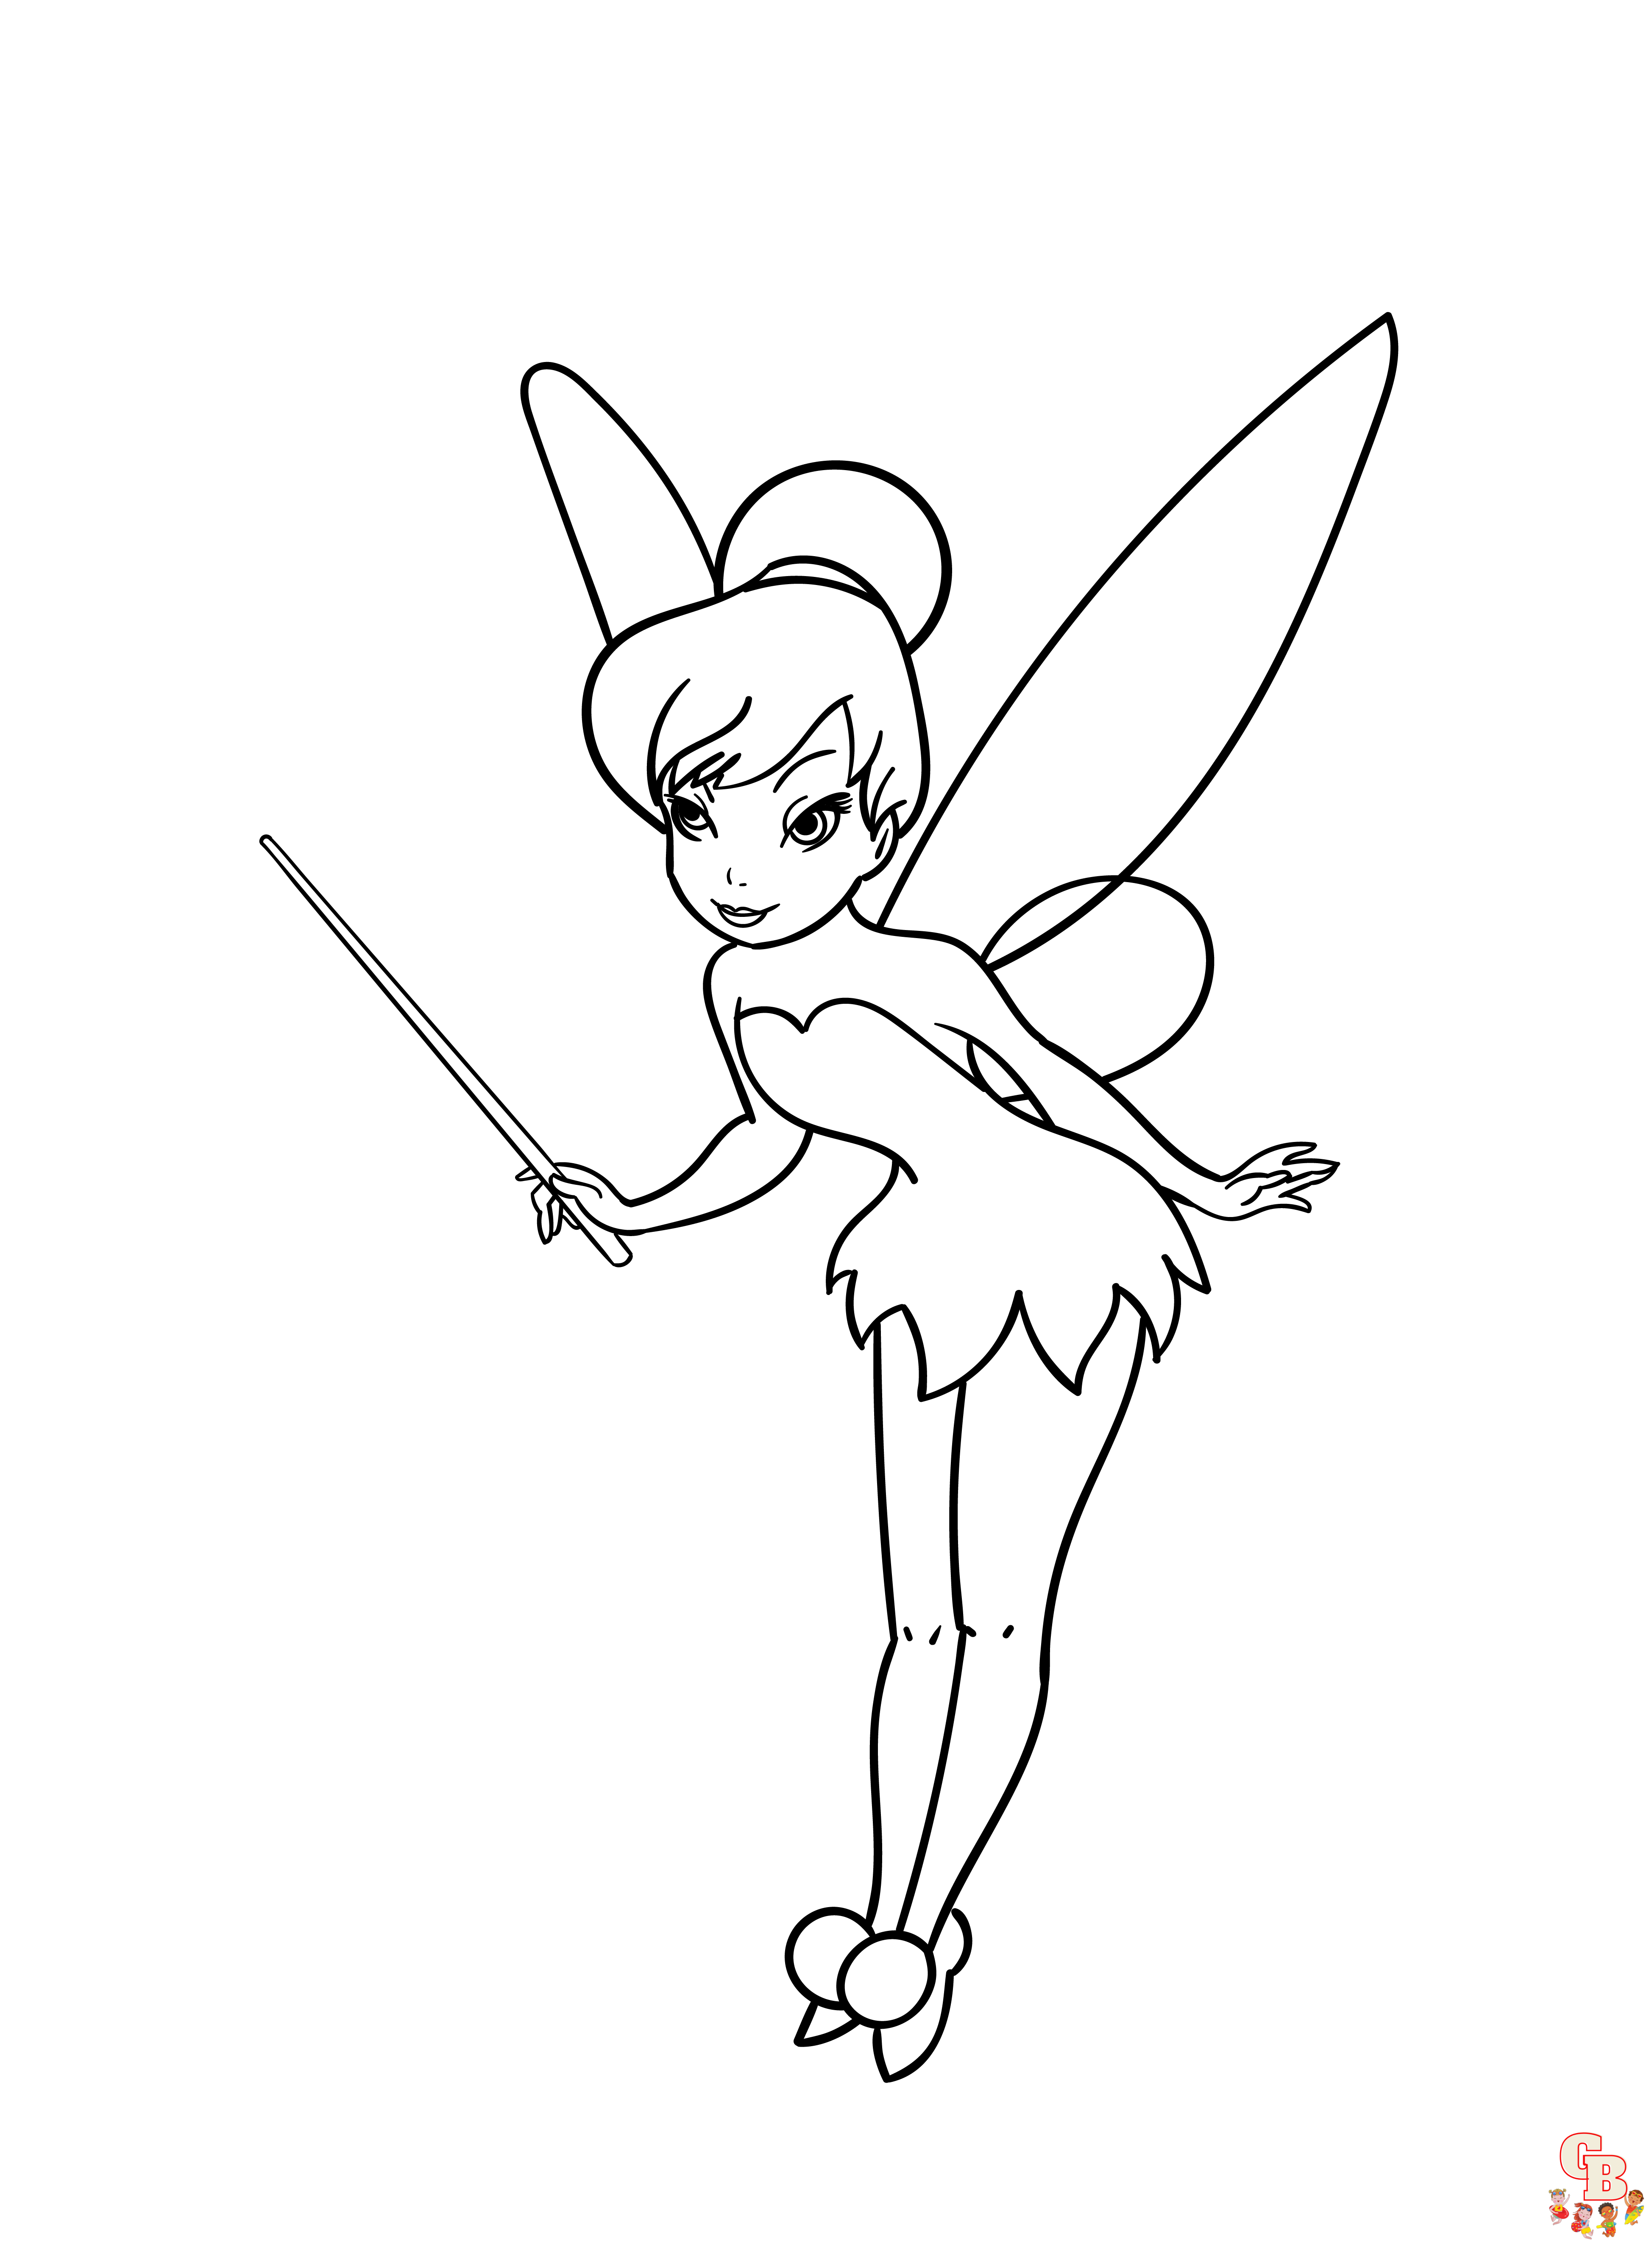 Enjoy the magic of tinkerbell coloring pages printable to use